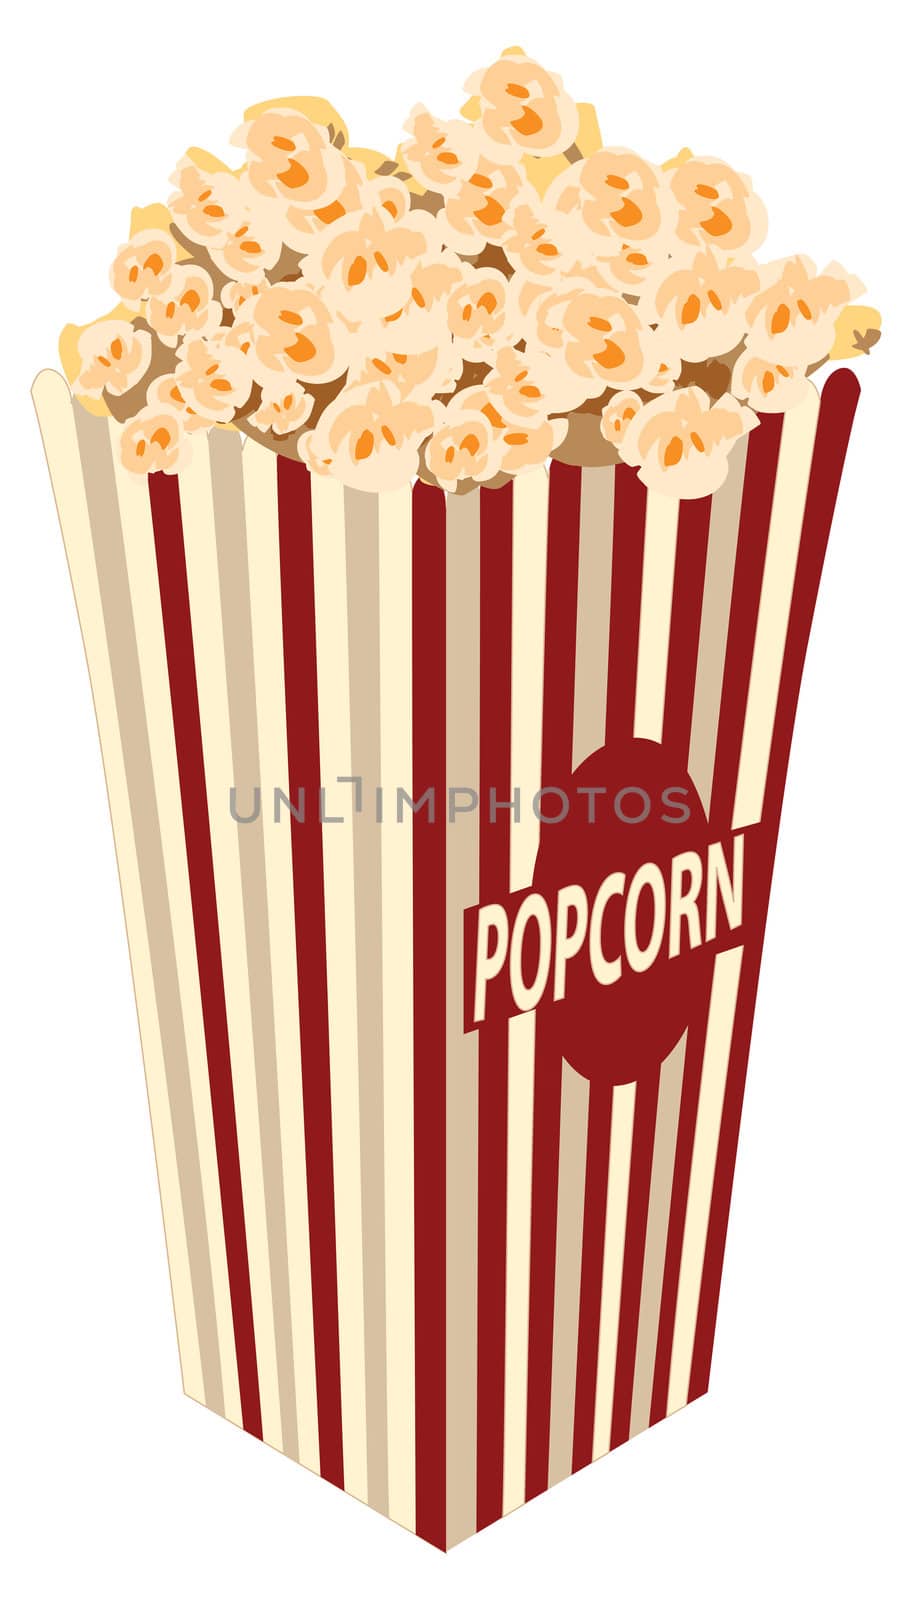 picture of box of popcorn with corns till the top
